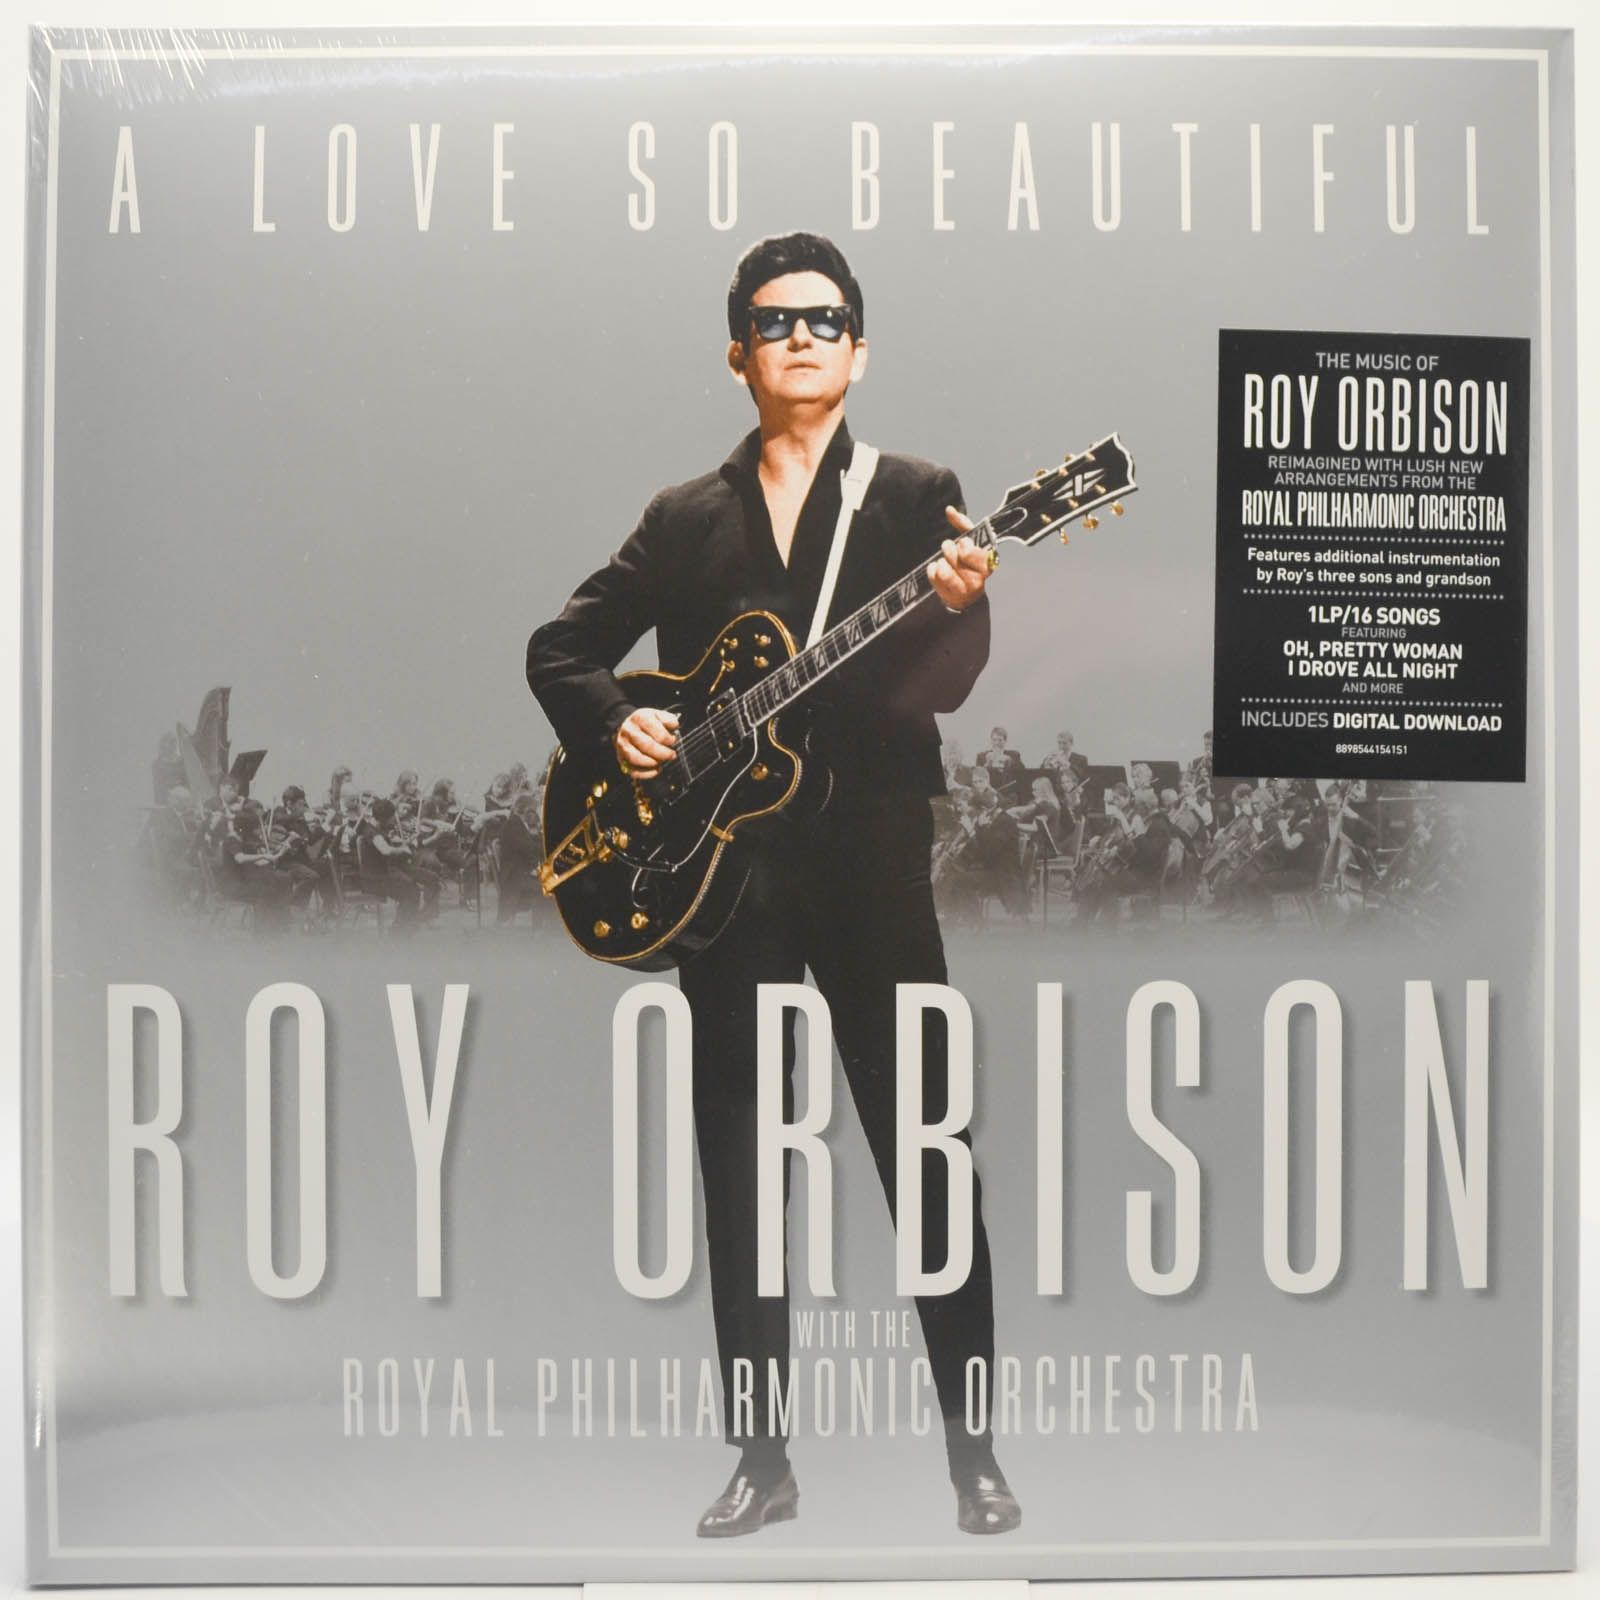 Roy Orbison With The Royal Philharmonic Orchestra — A Love So Beautiful, 2017